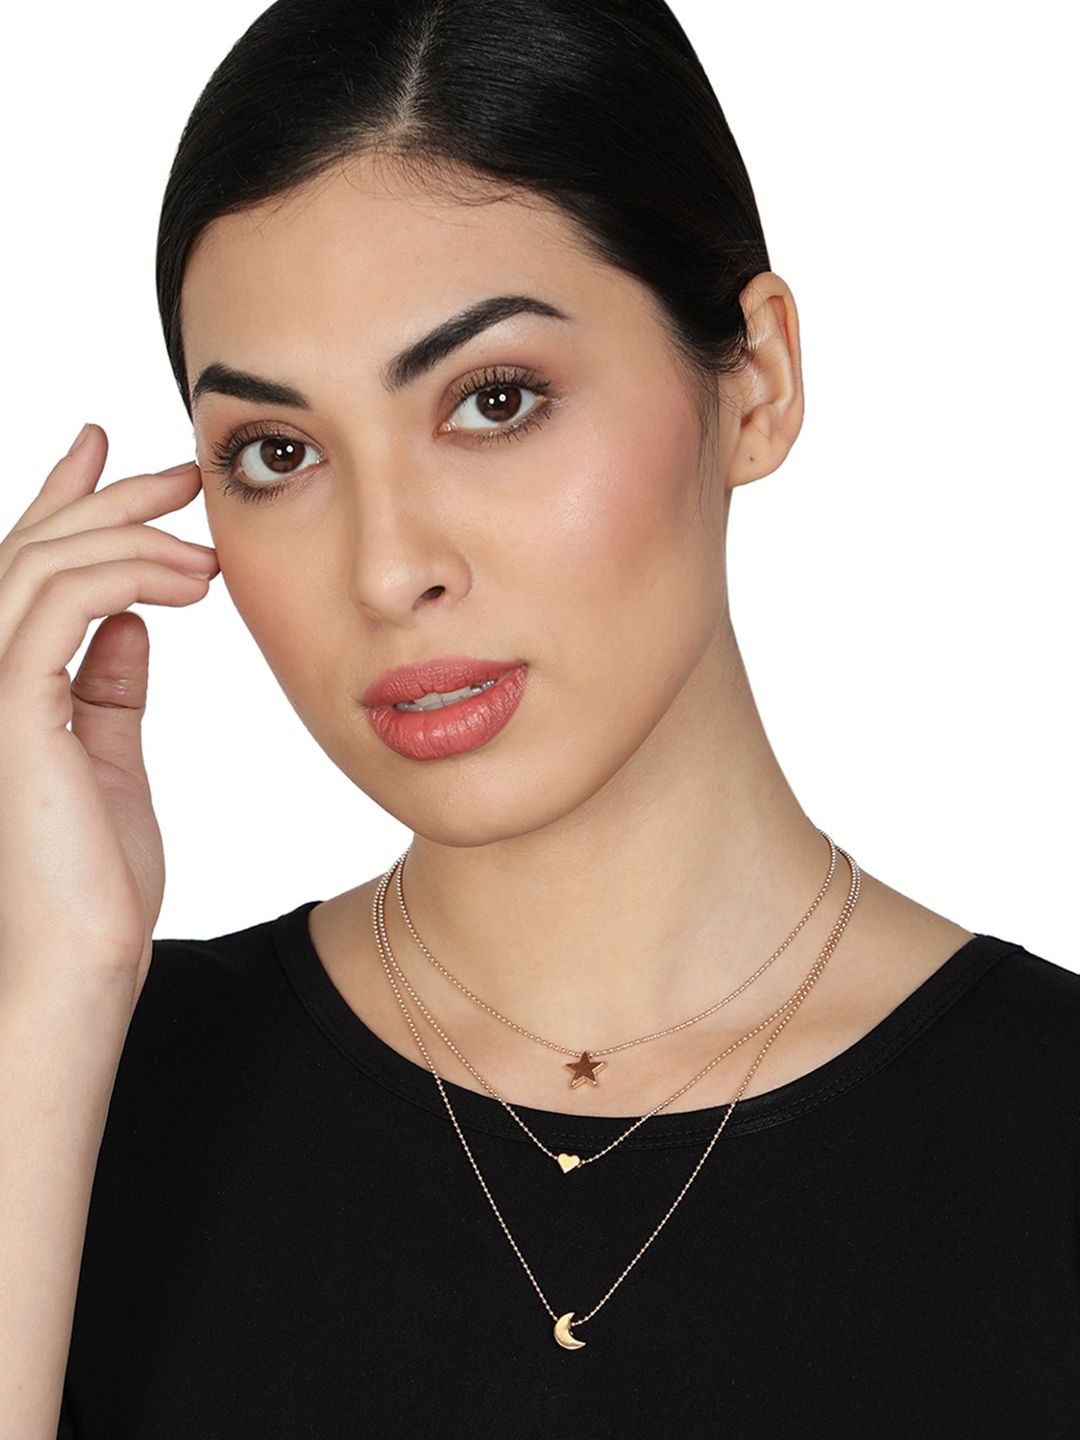 AQUASTREET Gold-Plated Heart Pendant Layered Necklace Price in India